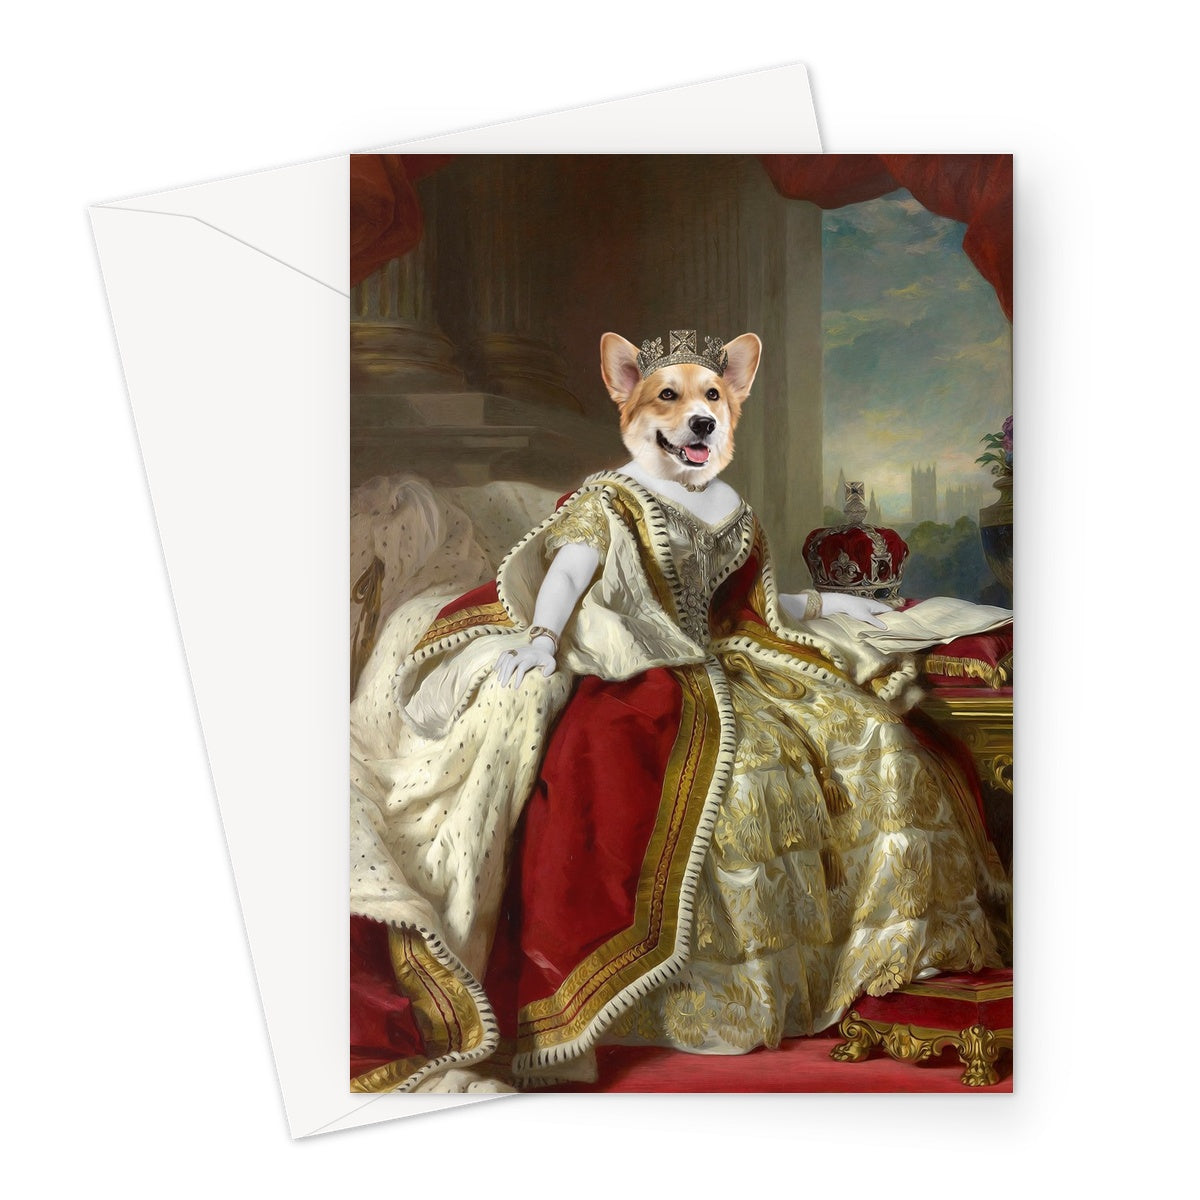 The Queen: Custom Pet Greeting Card, Paw & Glory,paw and glory, Paw & Glory, pawandglory, custom pet painting, dog canvas art, paintings of pets from photos, custom dog painting, pet portraits,